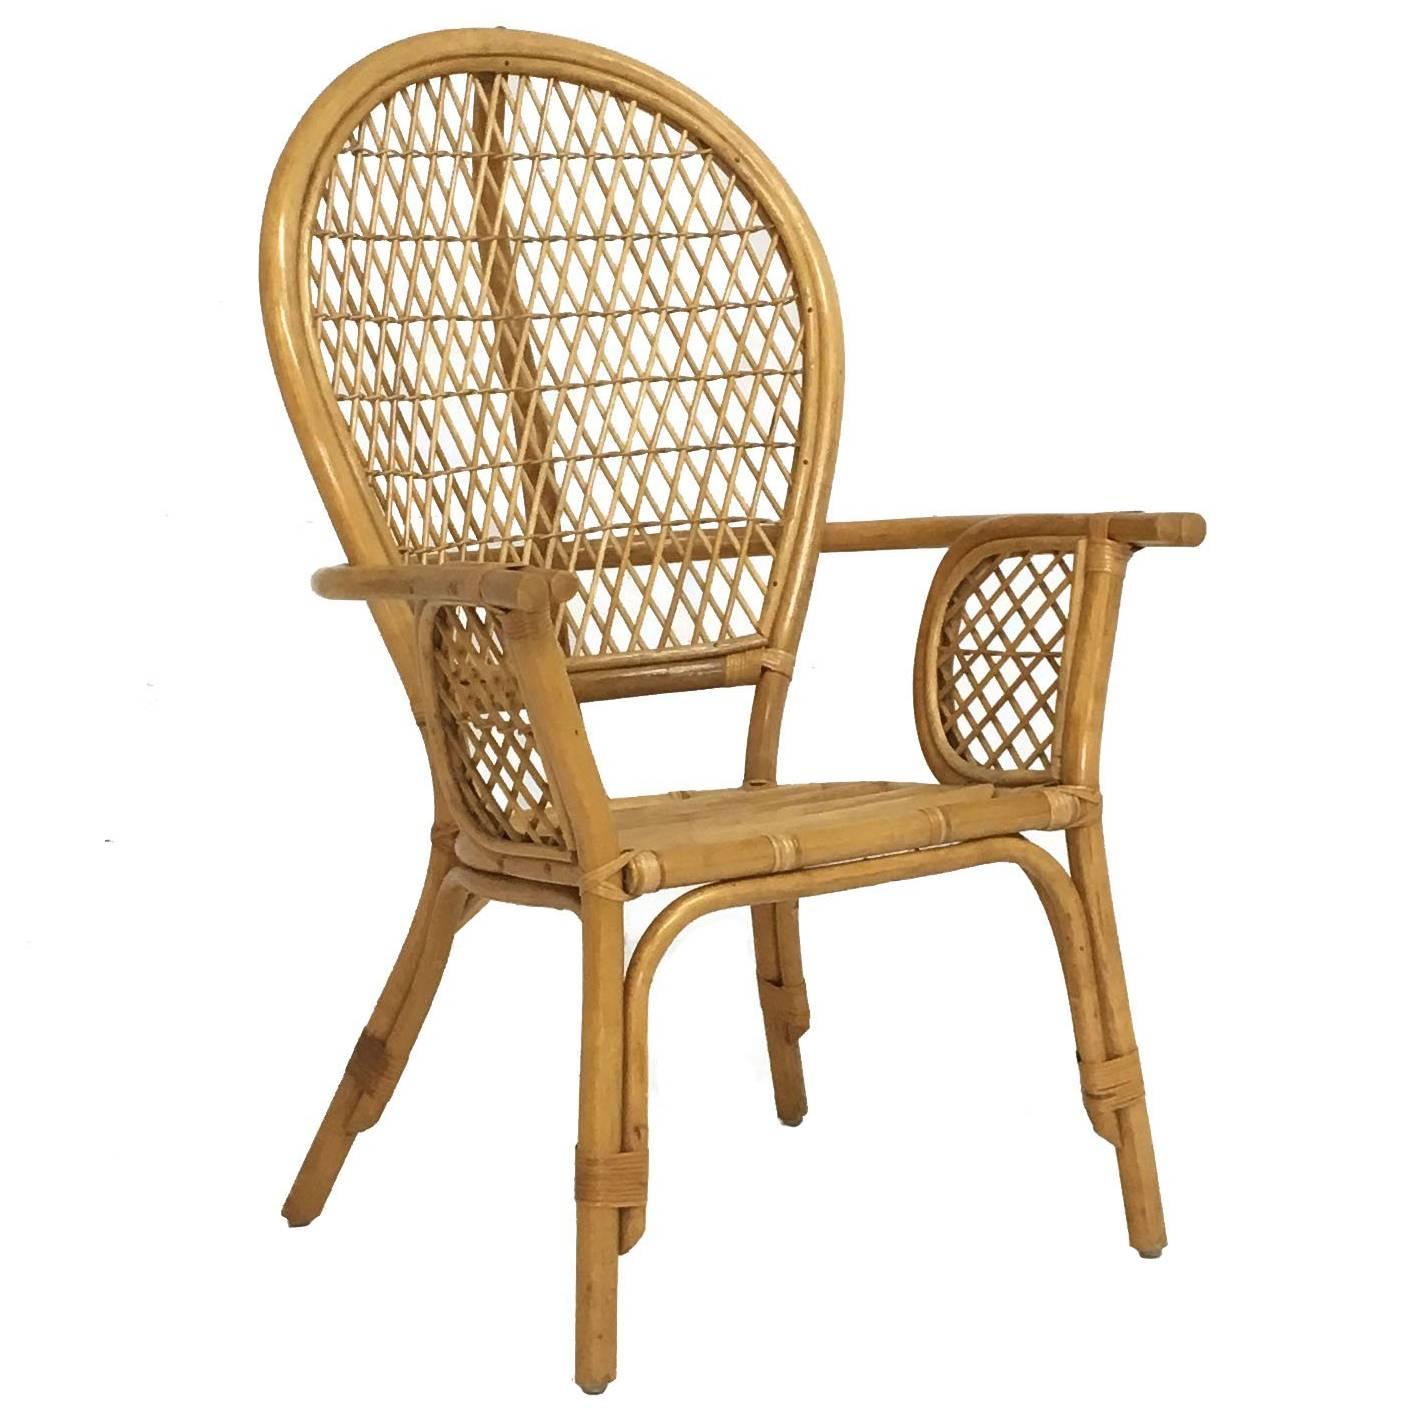 Midcentury Bamboo Fanback Peacock Chair For Sale